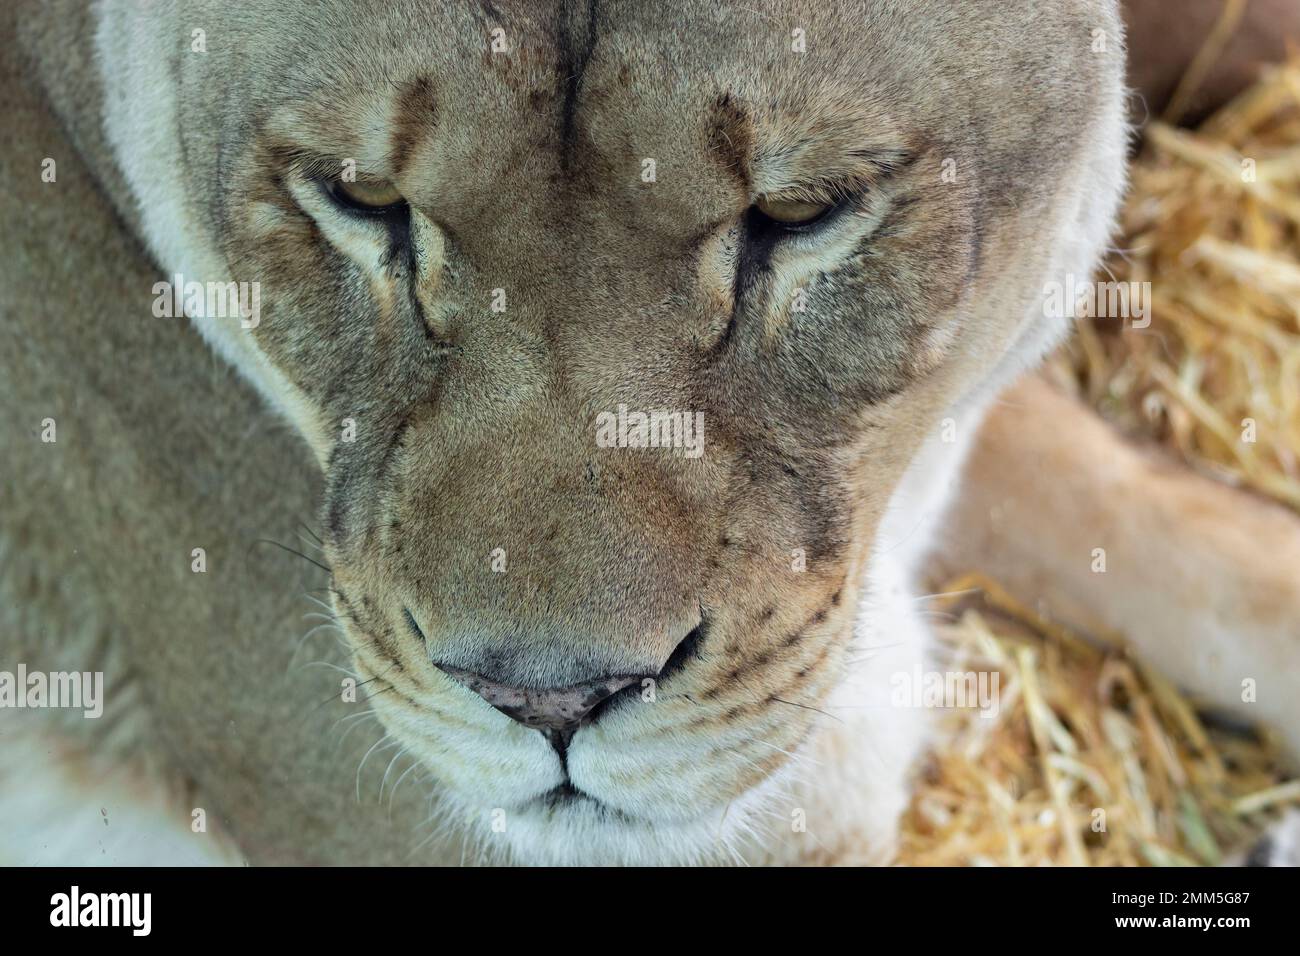 close up of lioness face Stock Photo